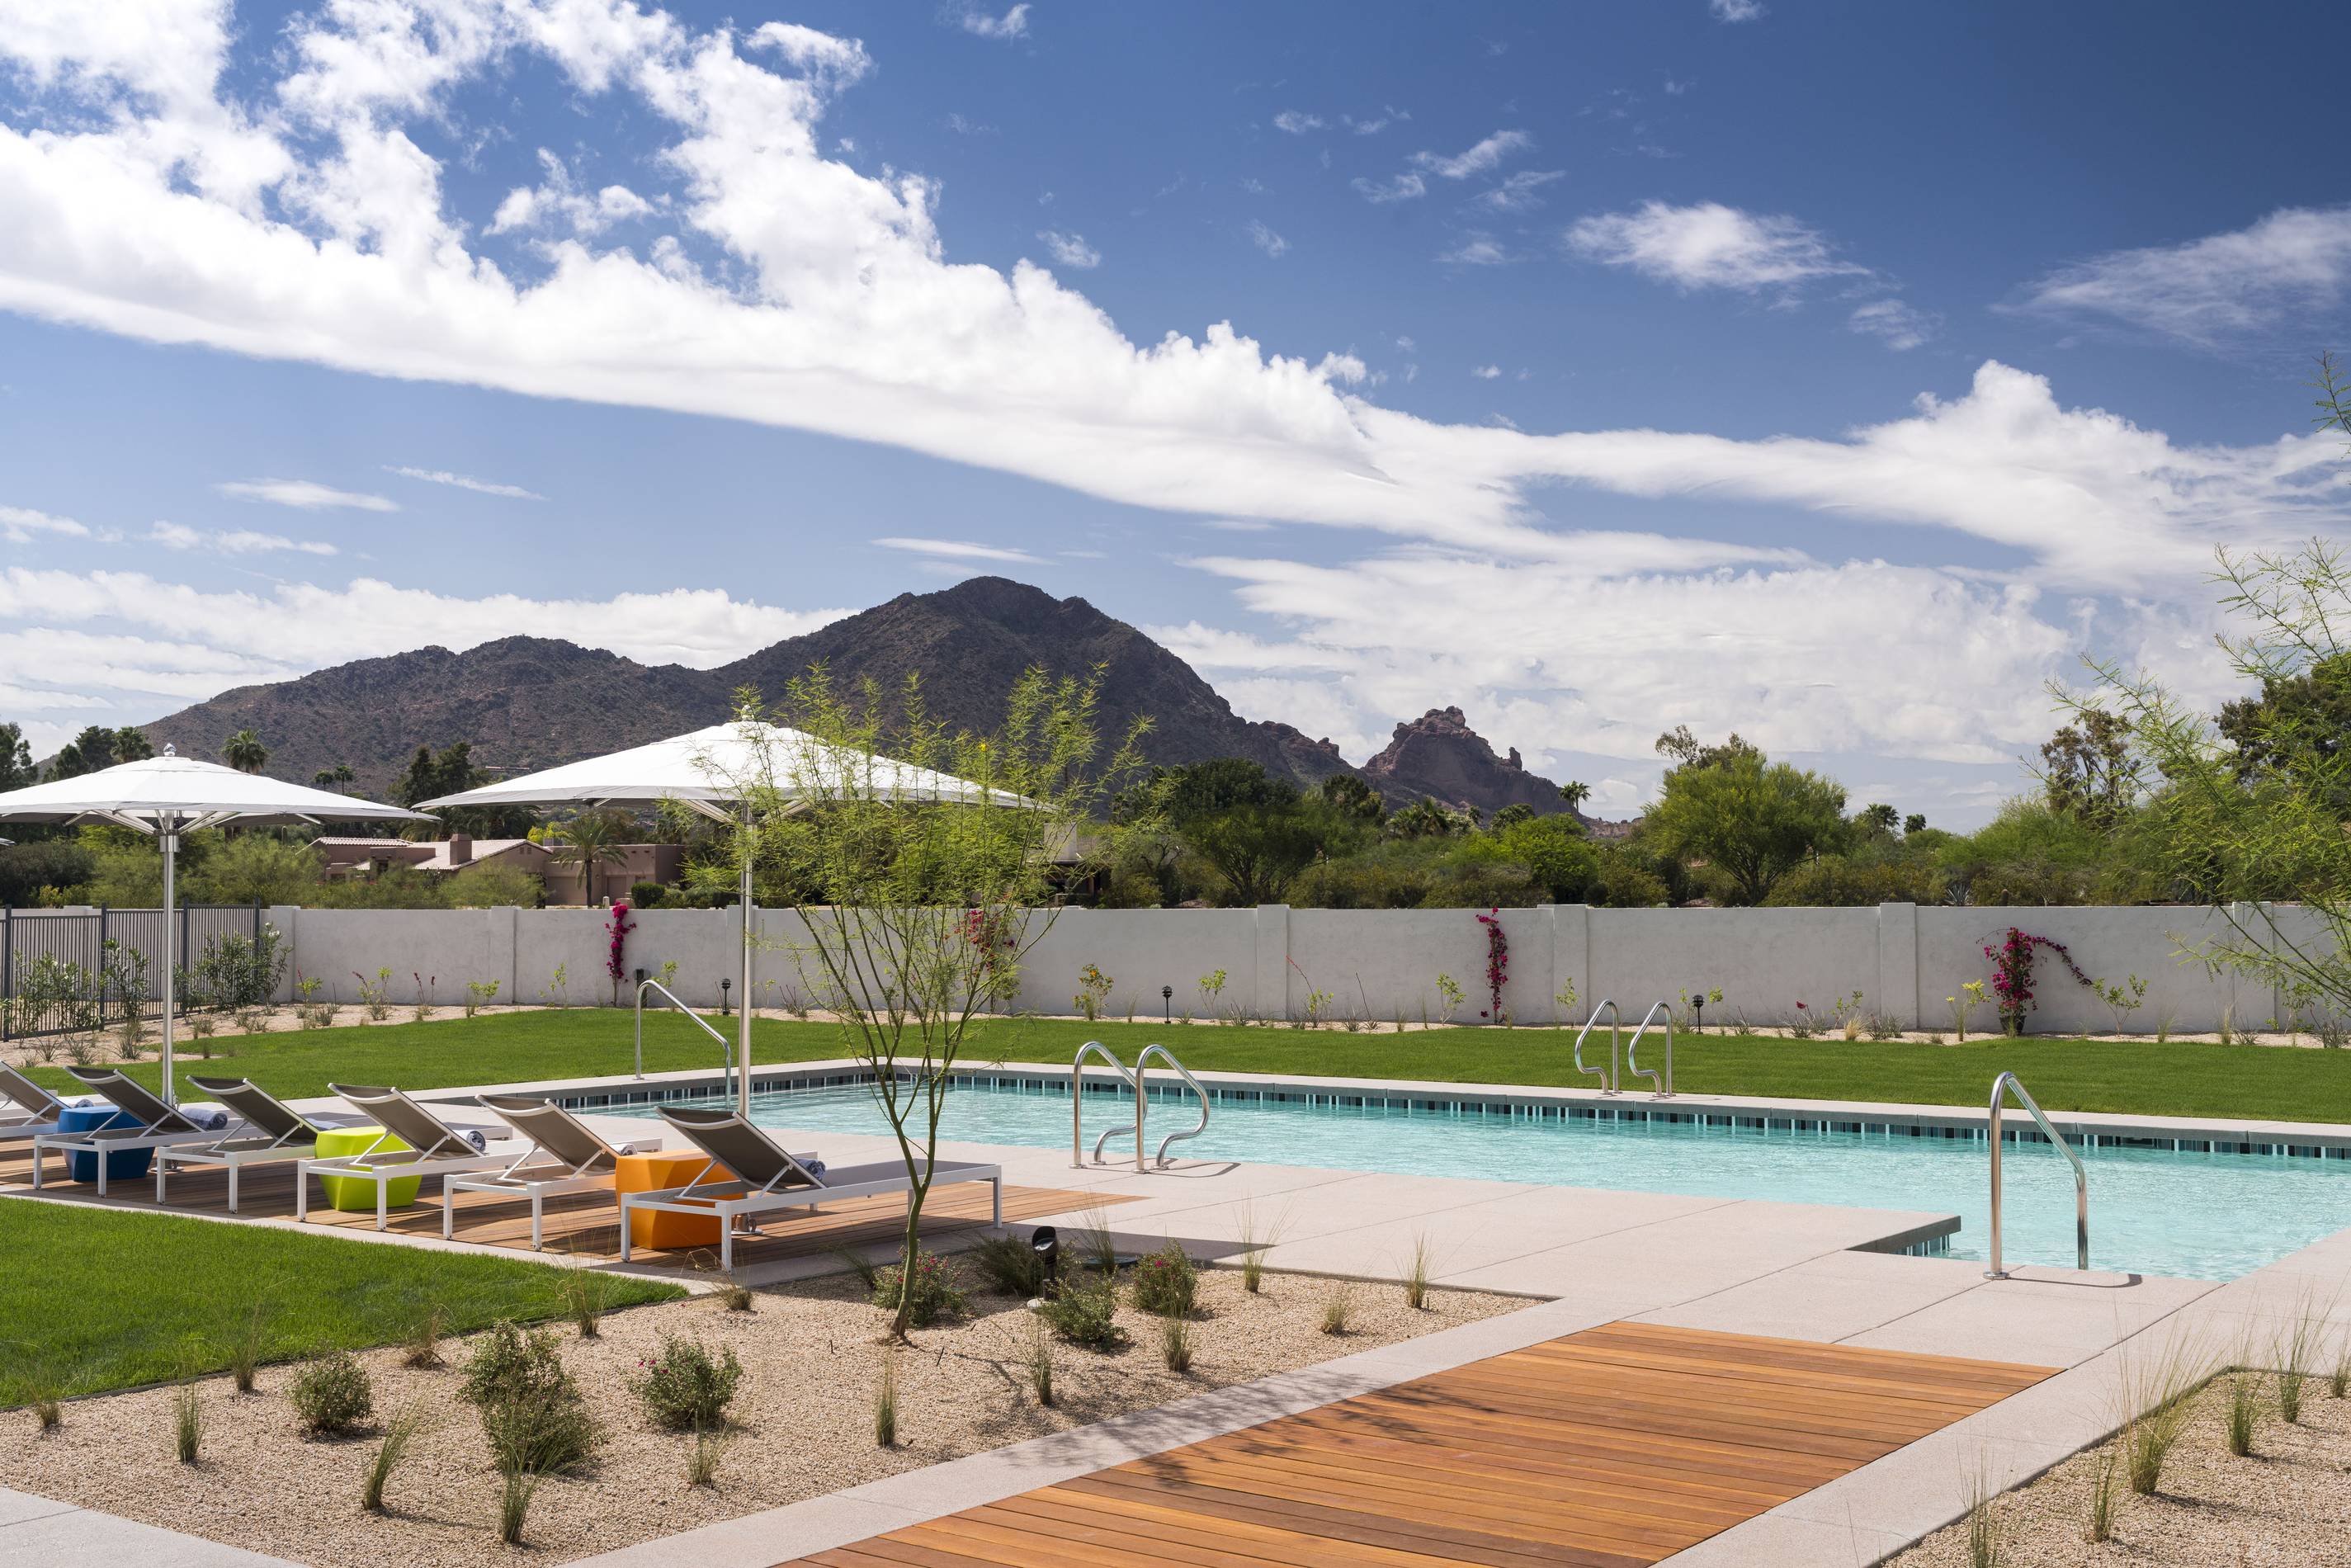 Andaz Scottsdale Resort and Bungalows pool with mountain in background